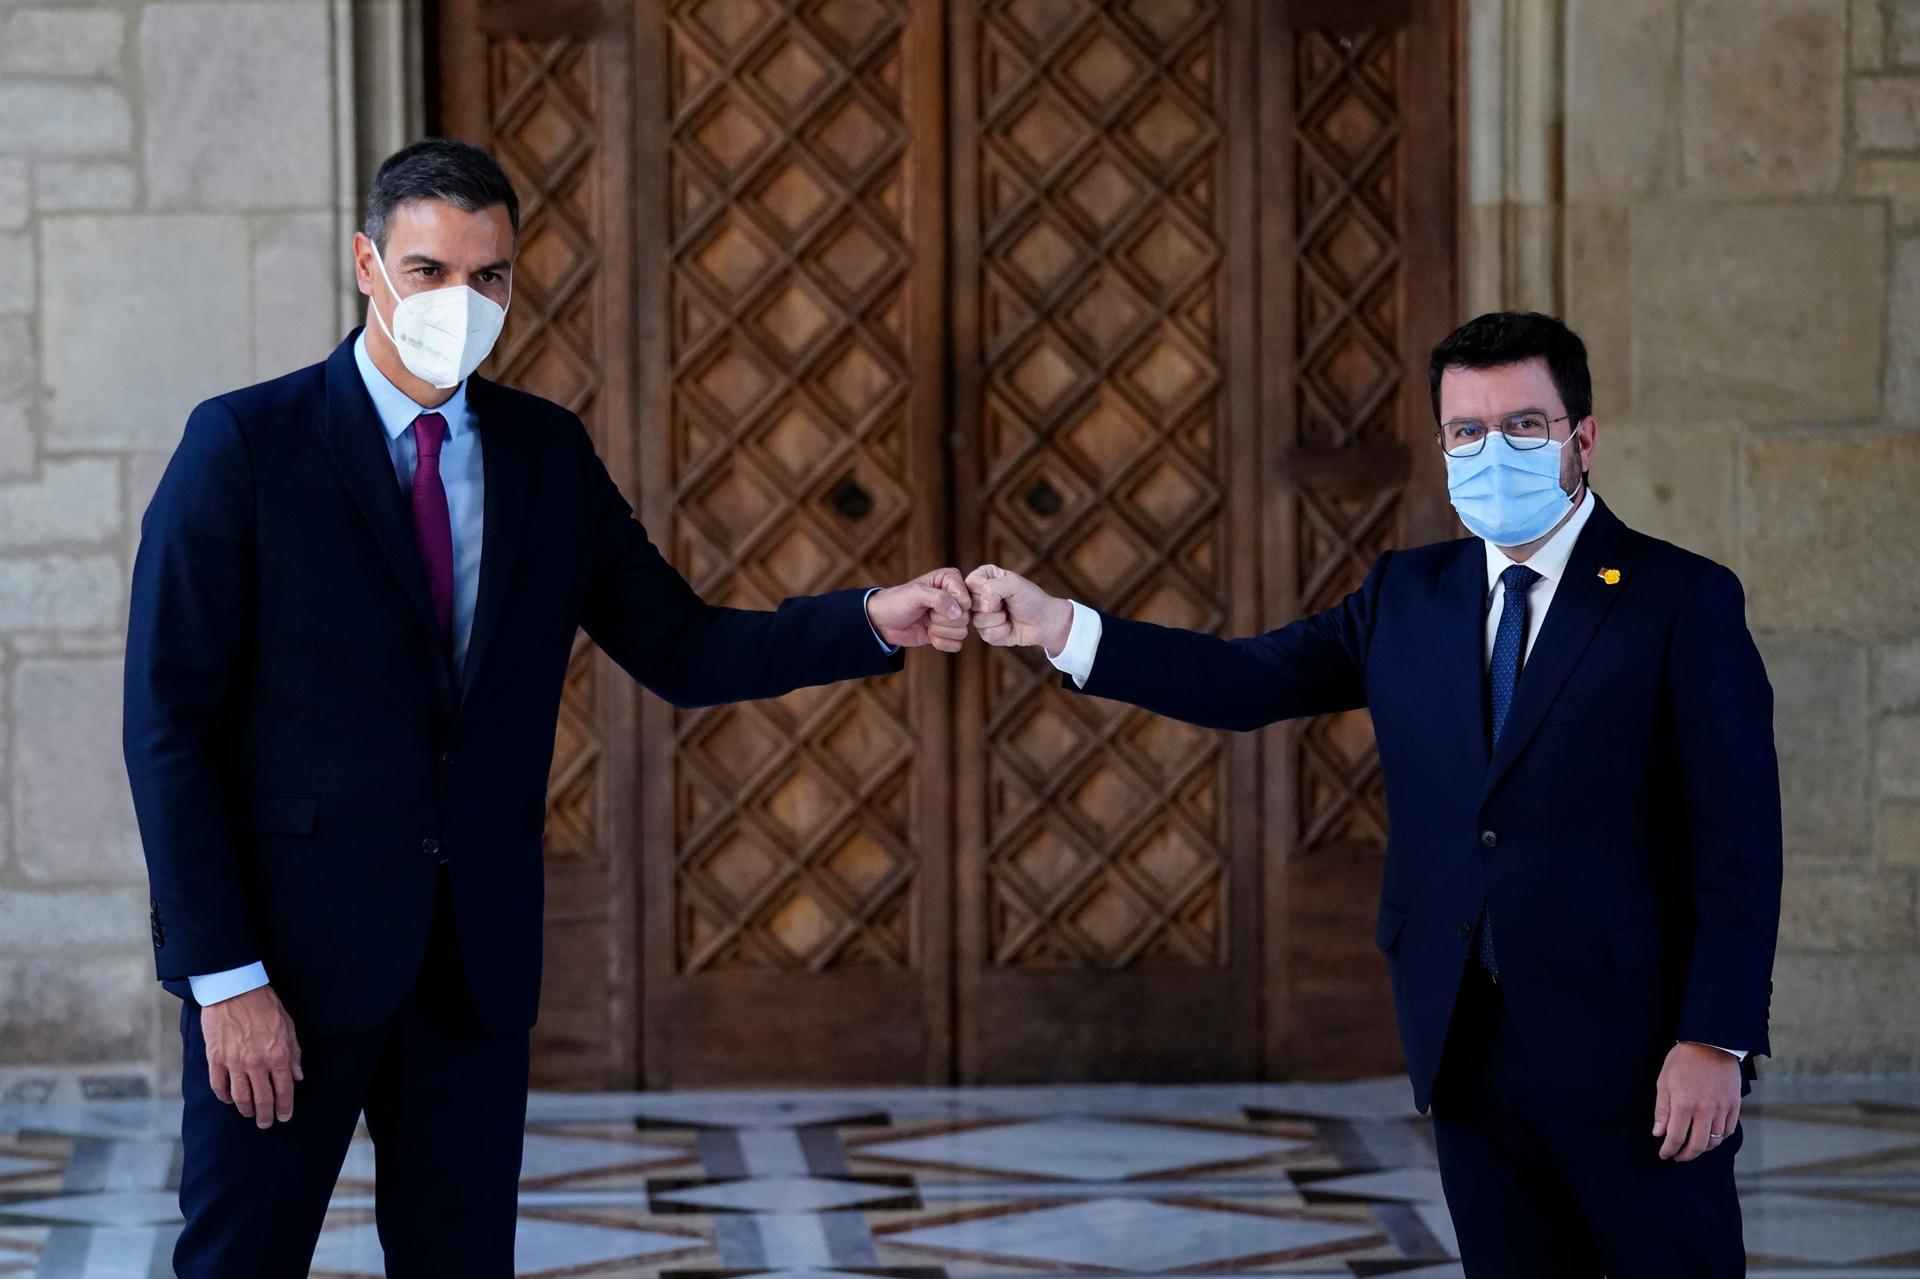 Spanish Prime Minister Pedro Sanchez and Catalonian regional president Pere Aragonès, right, meet at the headquarter of the Government of Catalonia in Barcelona, Spain, Wednesday, Sept. 15, 2021.